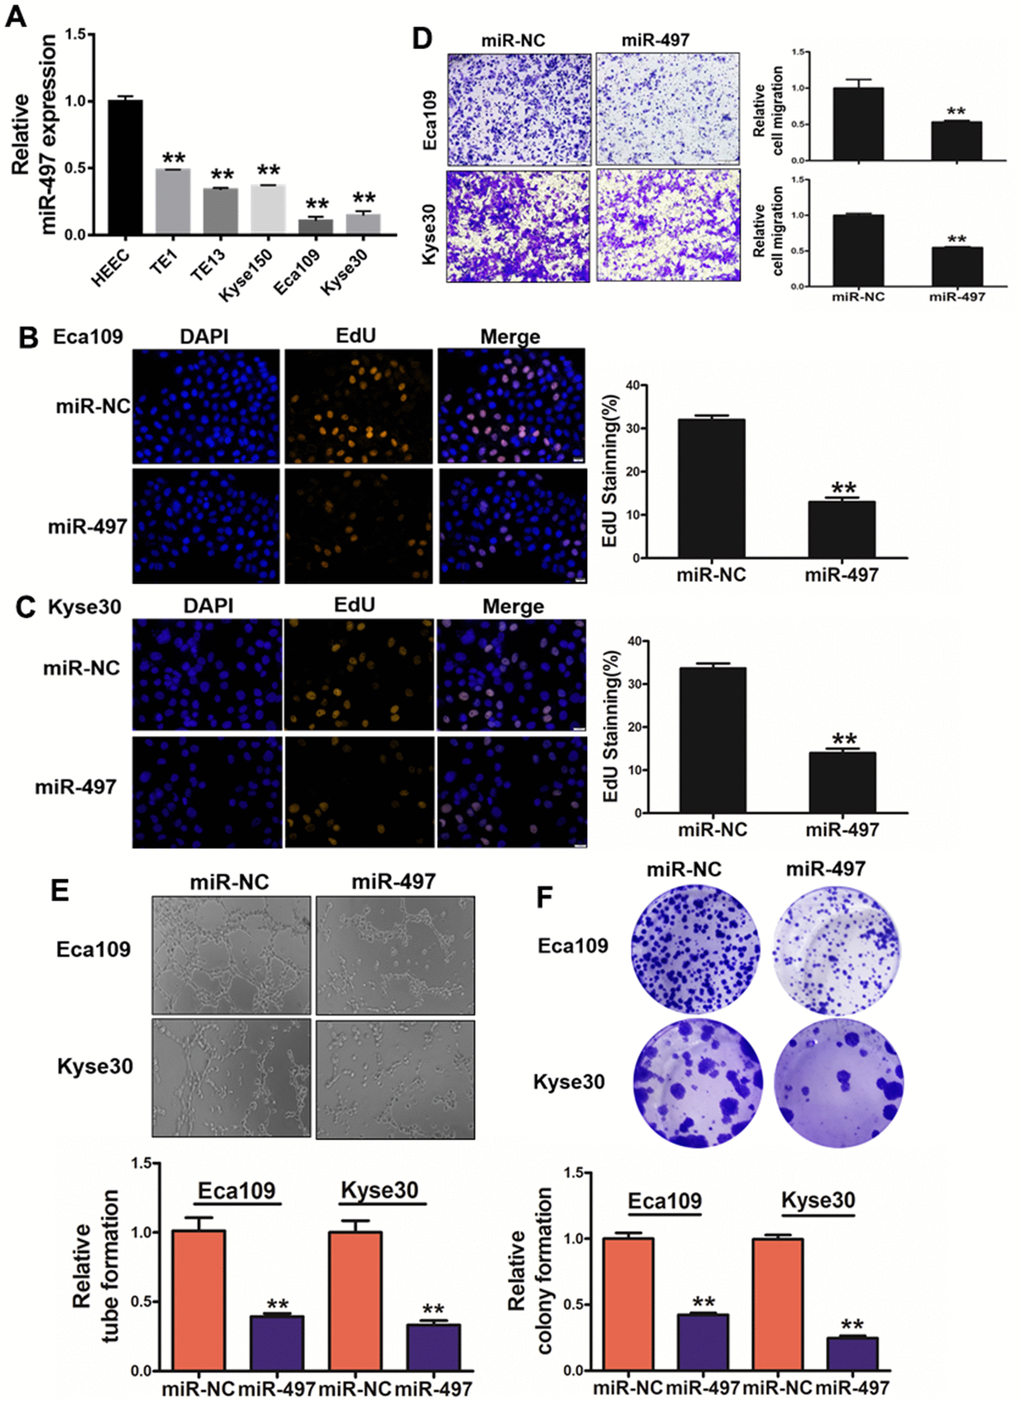 miR-497 overexpression inhibits cell proliferation, migration, tube formation and colony formation. (A) Compared to normal esophageal HEEC cell, the expression levels of miR-497 in EC cell lines were significantly lower. (B, C) Overexpression of miR-497 greatly reduced percentages of EdU staining signals in Eca109 and Kyse30 cells. (D) Overexpression of miR-497 inhibited cell migration activities. (E) The overexpression of miR-497 attenuated tube formation activities. (F) Forced expression of miR-497 attenuated the colony formation activities in cancer cells. All data were representative of 3 independent experiments. ** indicated significant difference at p